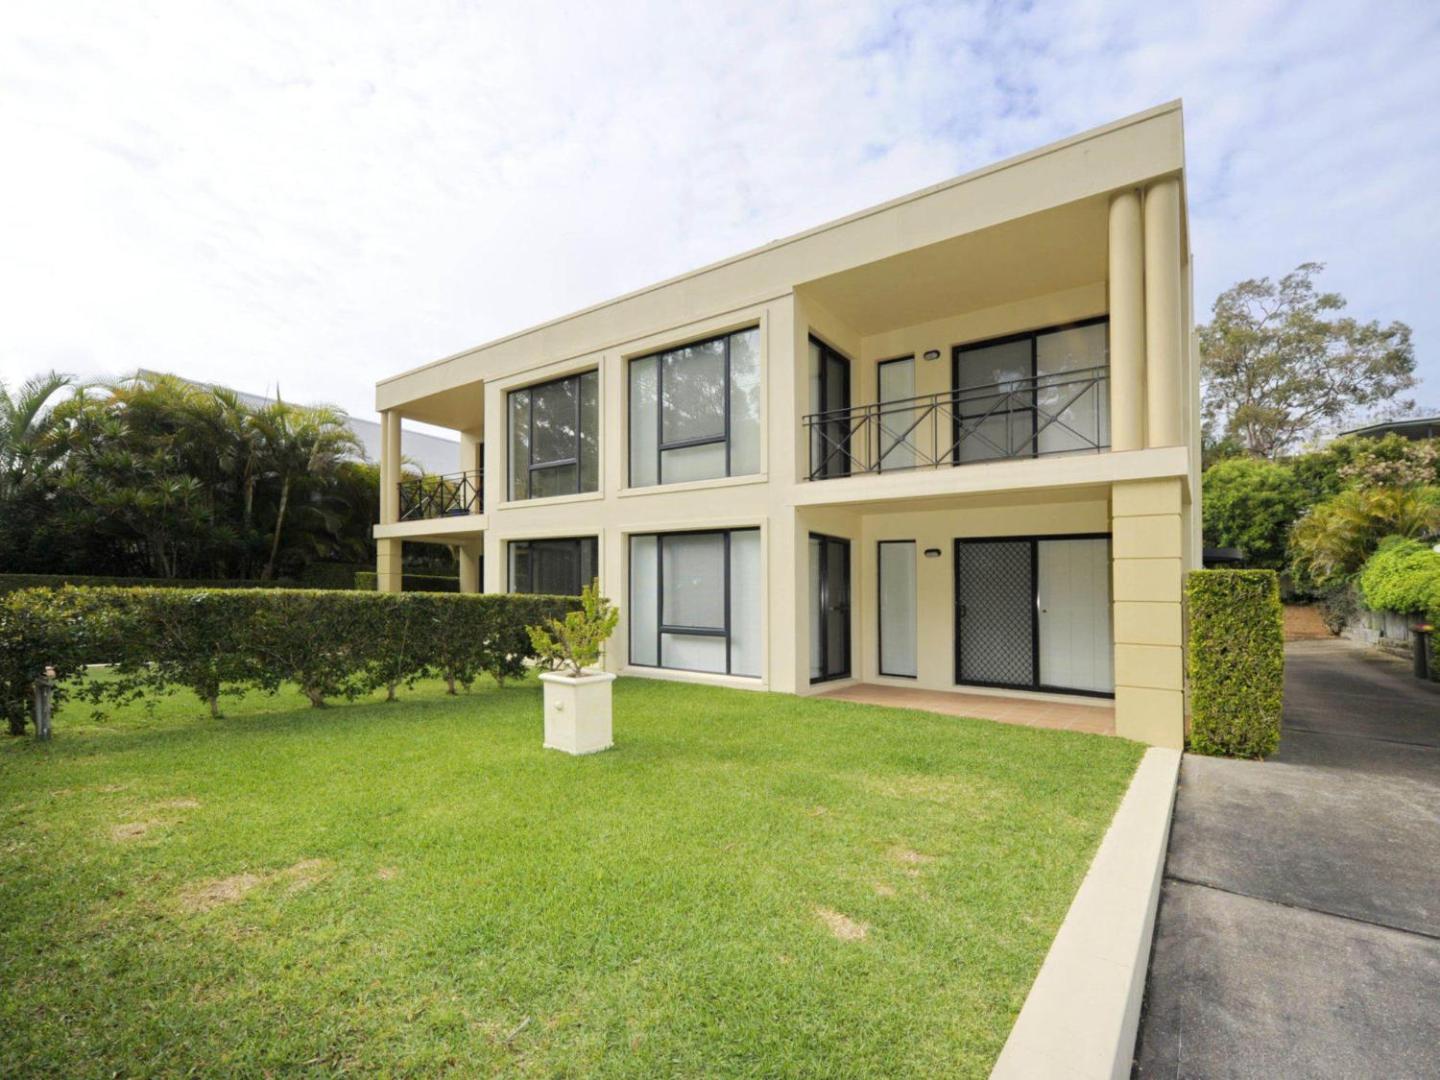 ‘Bagnall Views’ 2/161 Government Rd – Stylish & modern duplex across the road to the waters edge